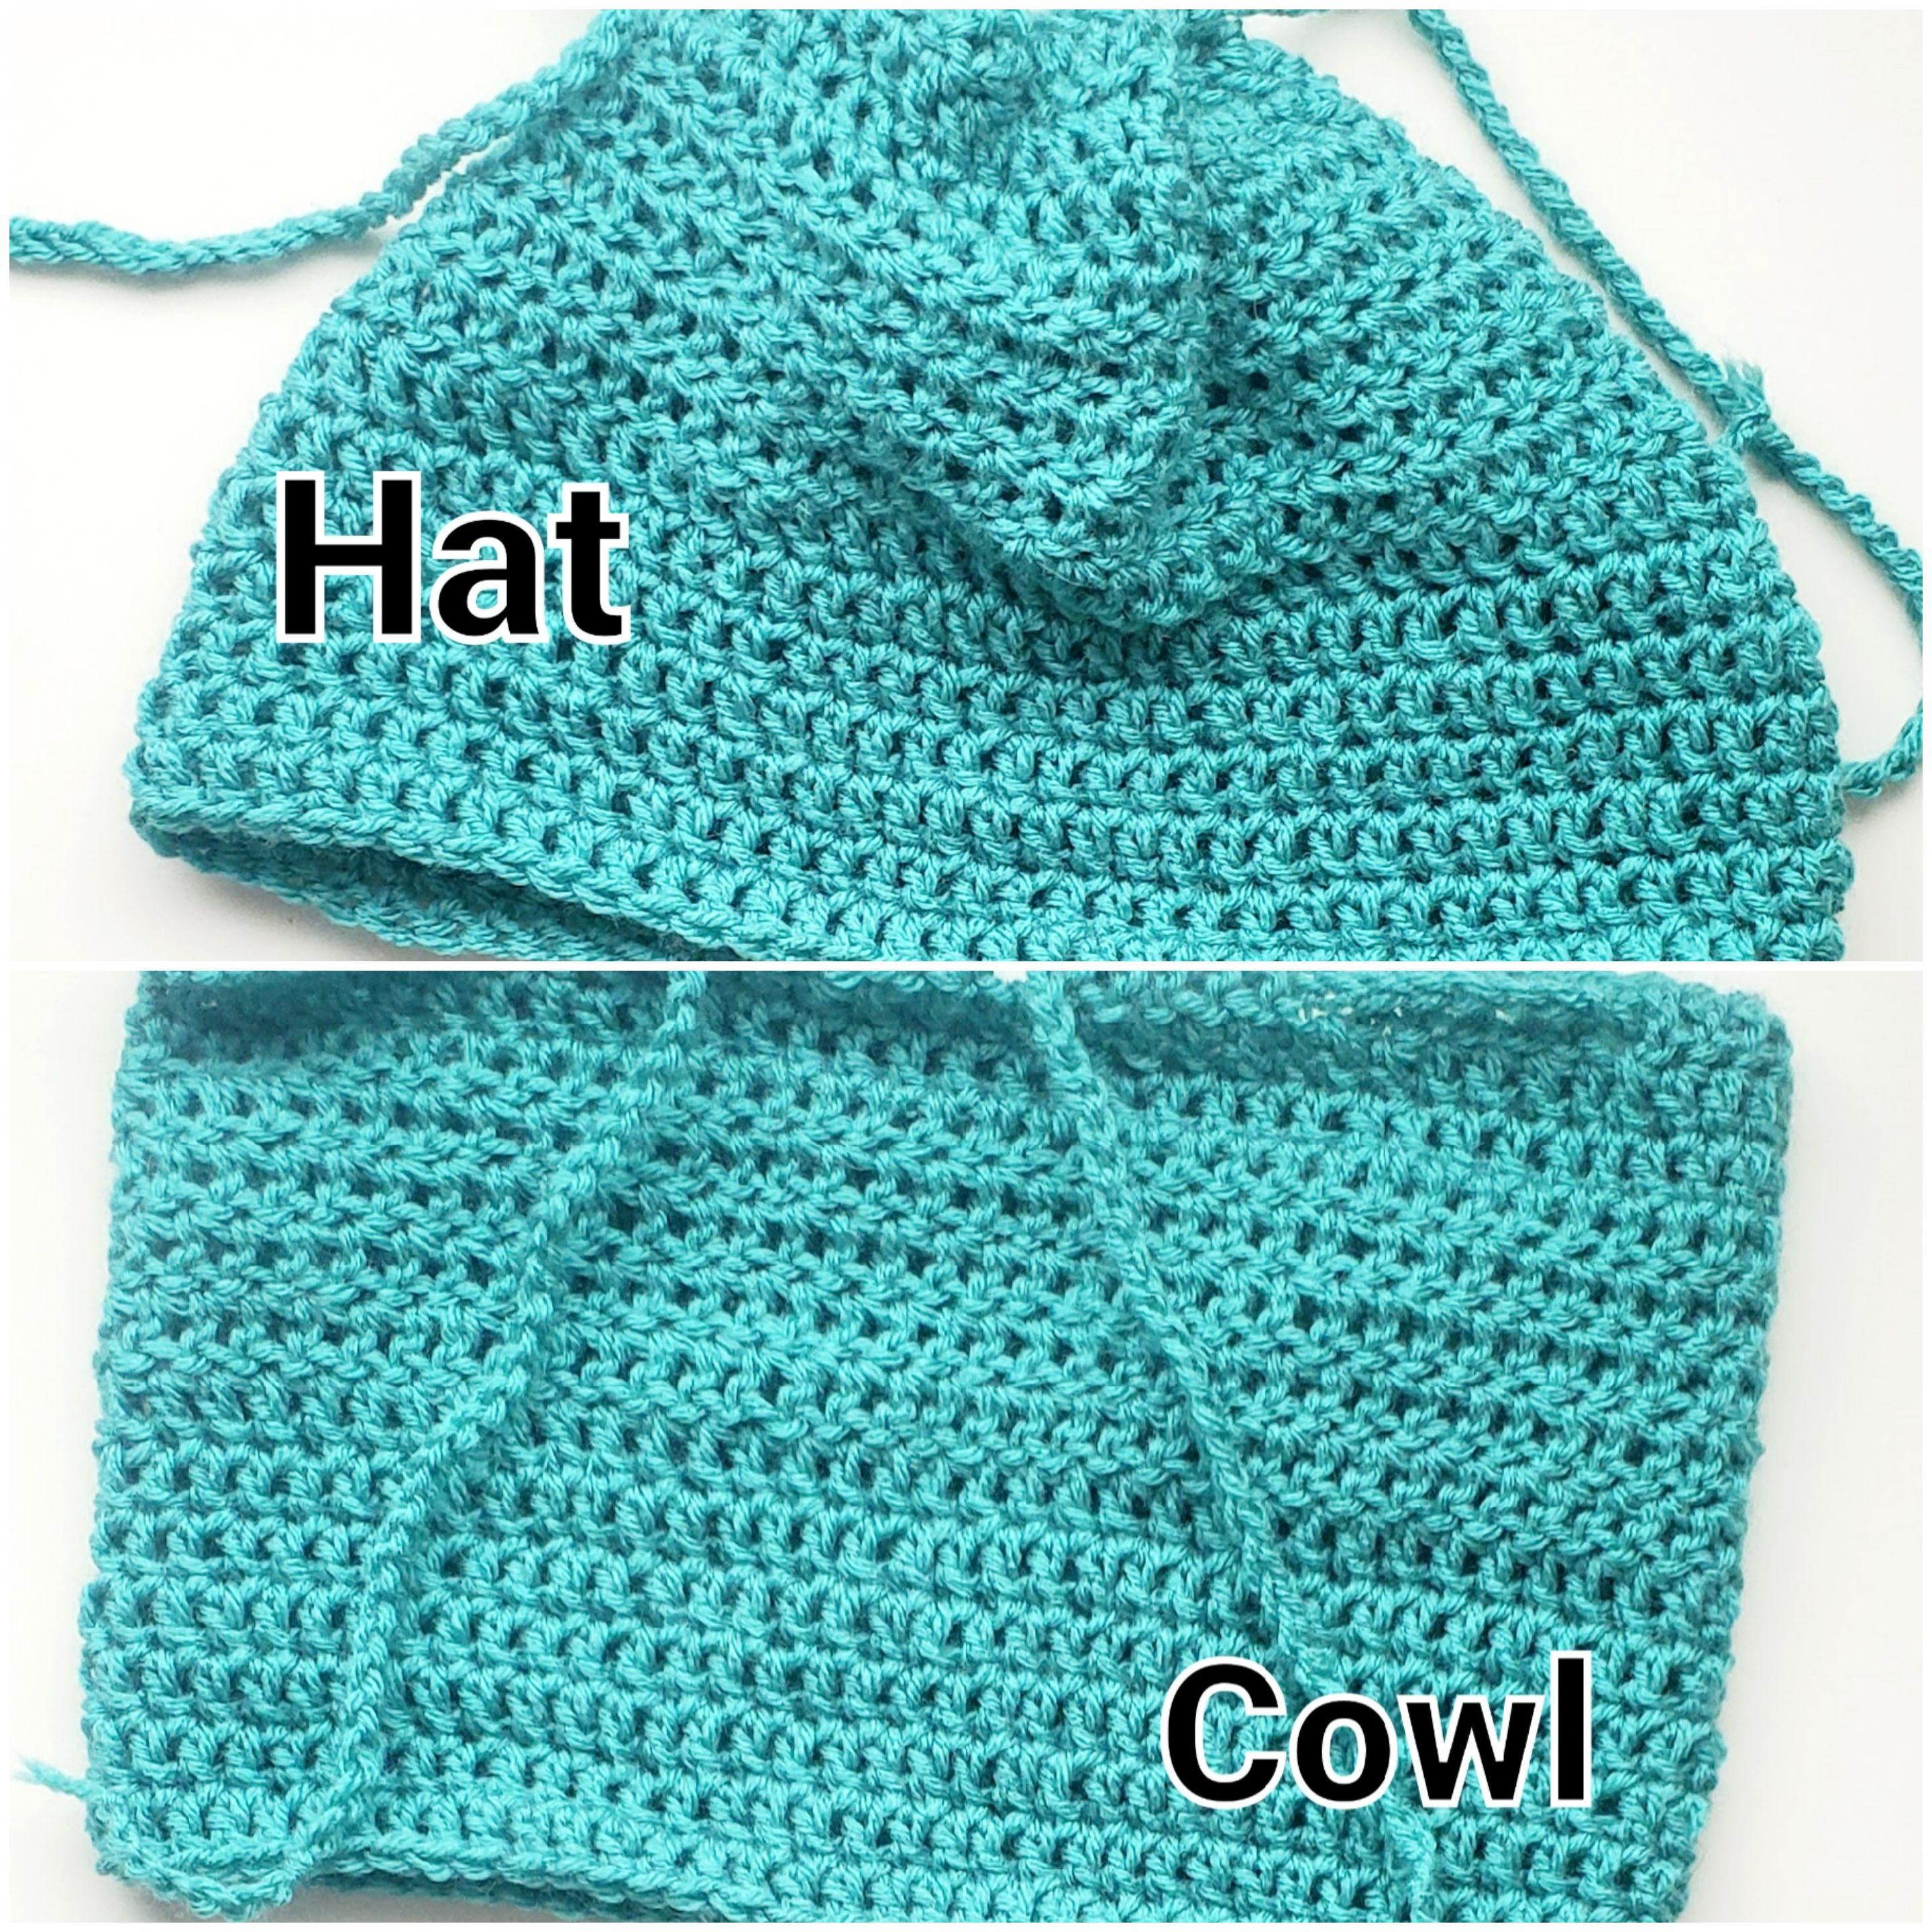 Crochet Cowl and Hat 